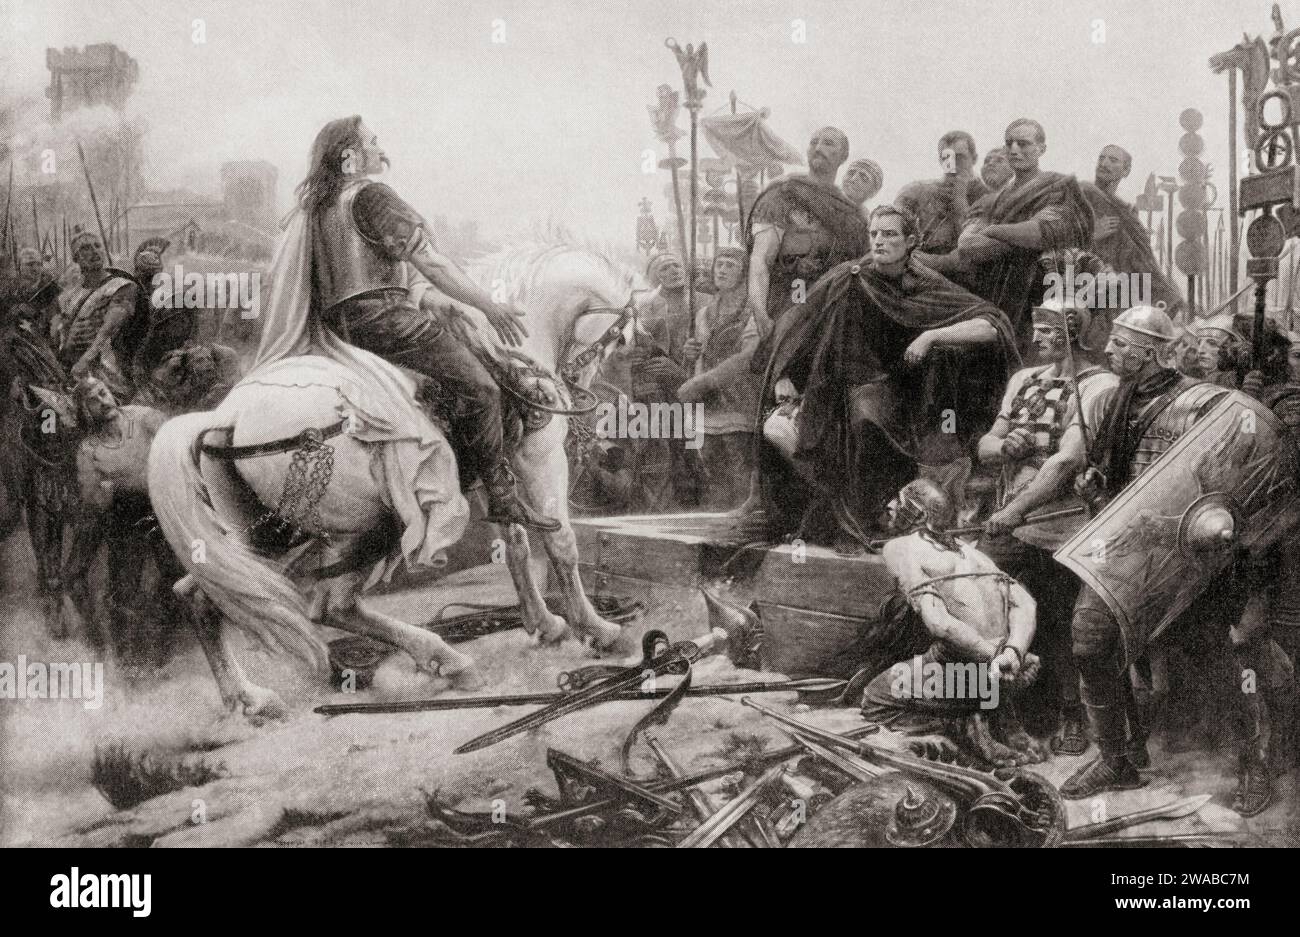 Vercingetorix throws down his arms at the feet of Julius Caesar, 52 BC.  After this he was imprisoned in the Tullianum in Rome for five years, before being publicly displayed in Caesar's triumph in 46 BC, after which he was executedin his prison, probably by strangulation. Vercingetorix, c. 82 BC – 46 BC.  Chieftain of the Arverni tribe. Stock Photo